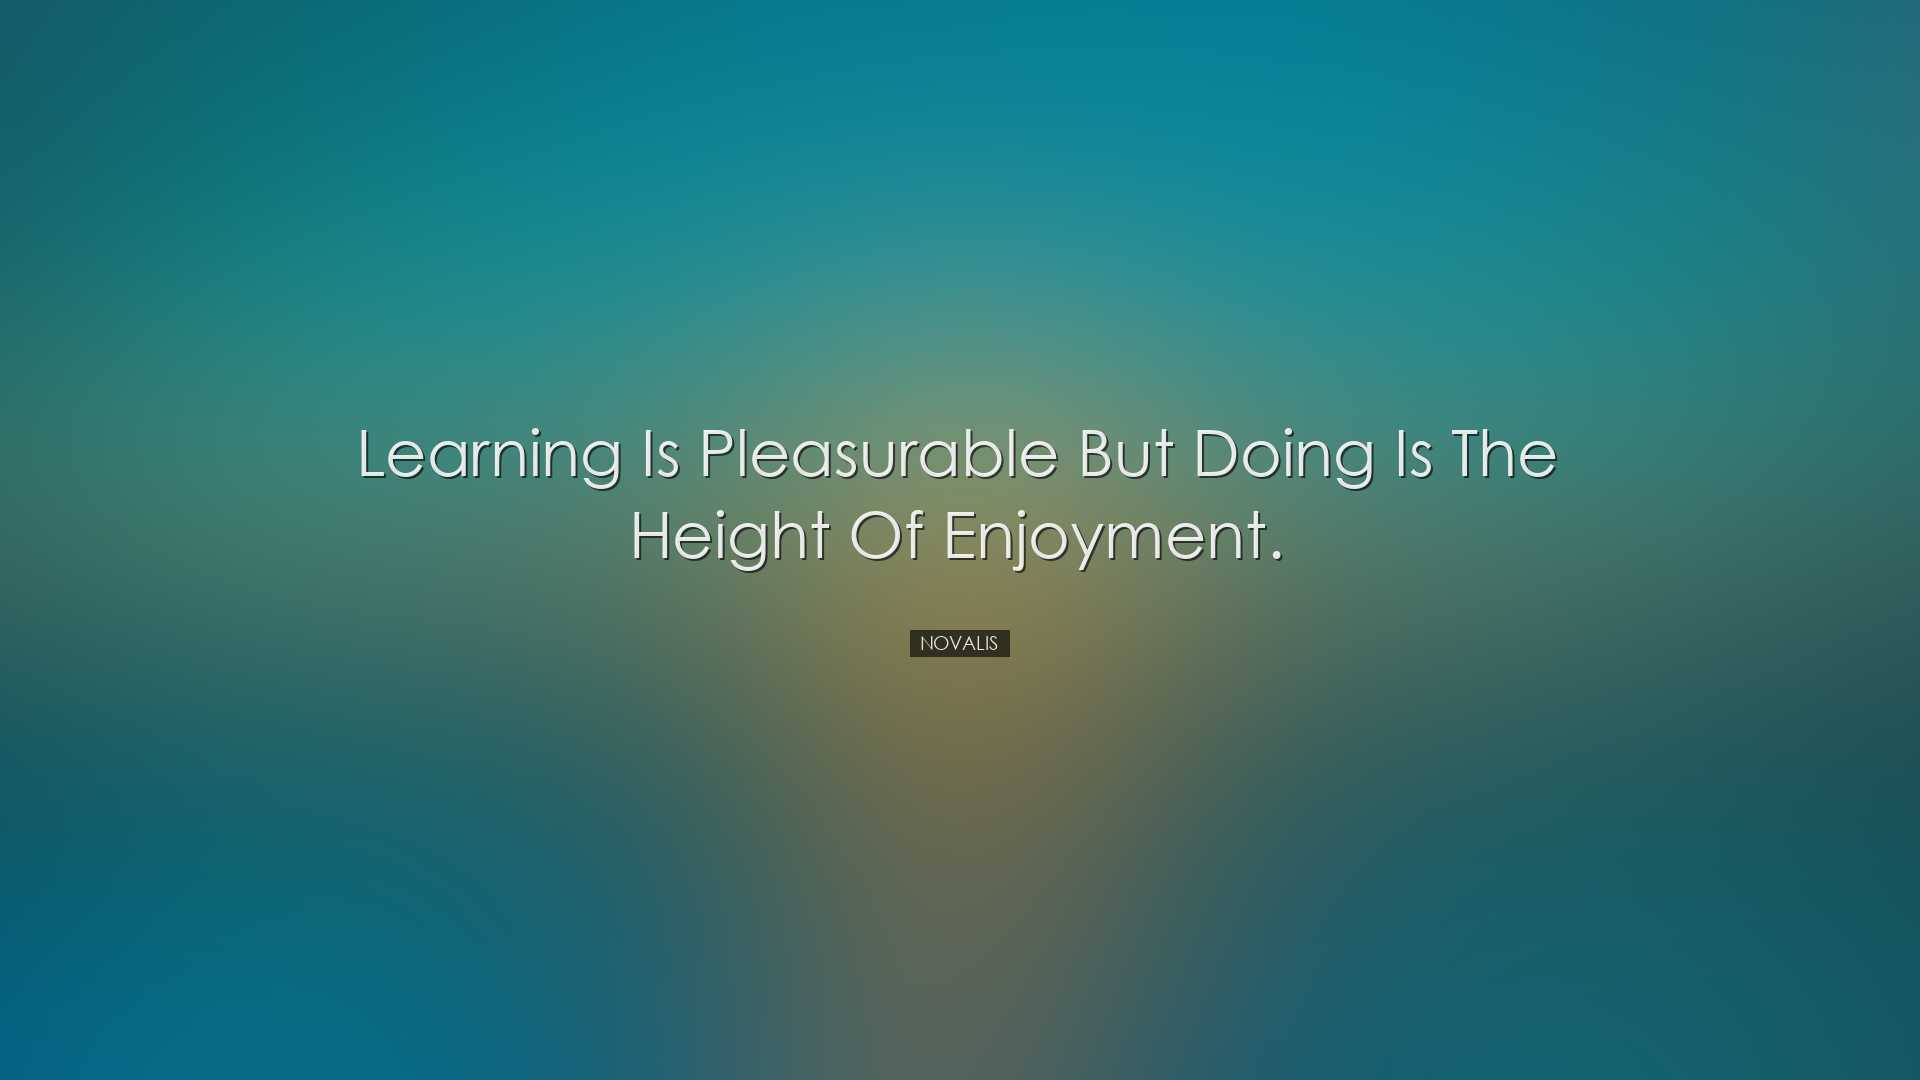 Learning is pleasurable but doing is the height of enjoyment. - No